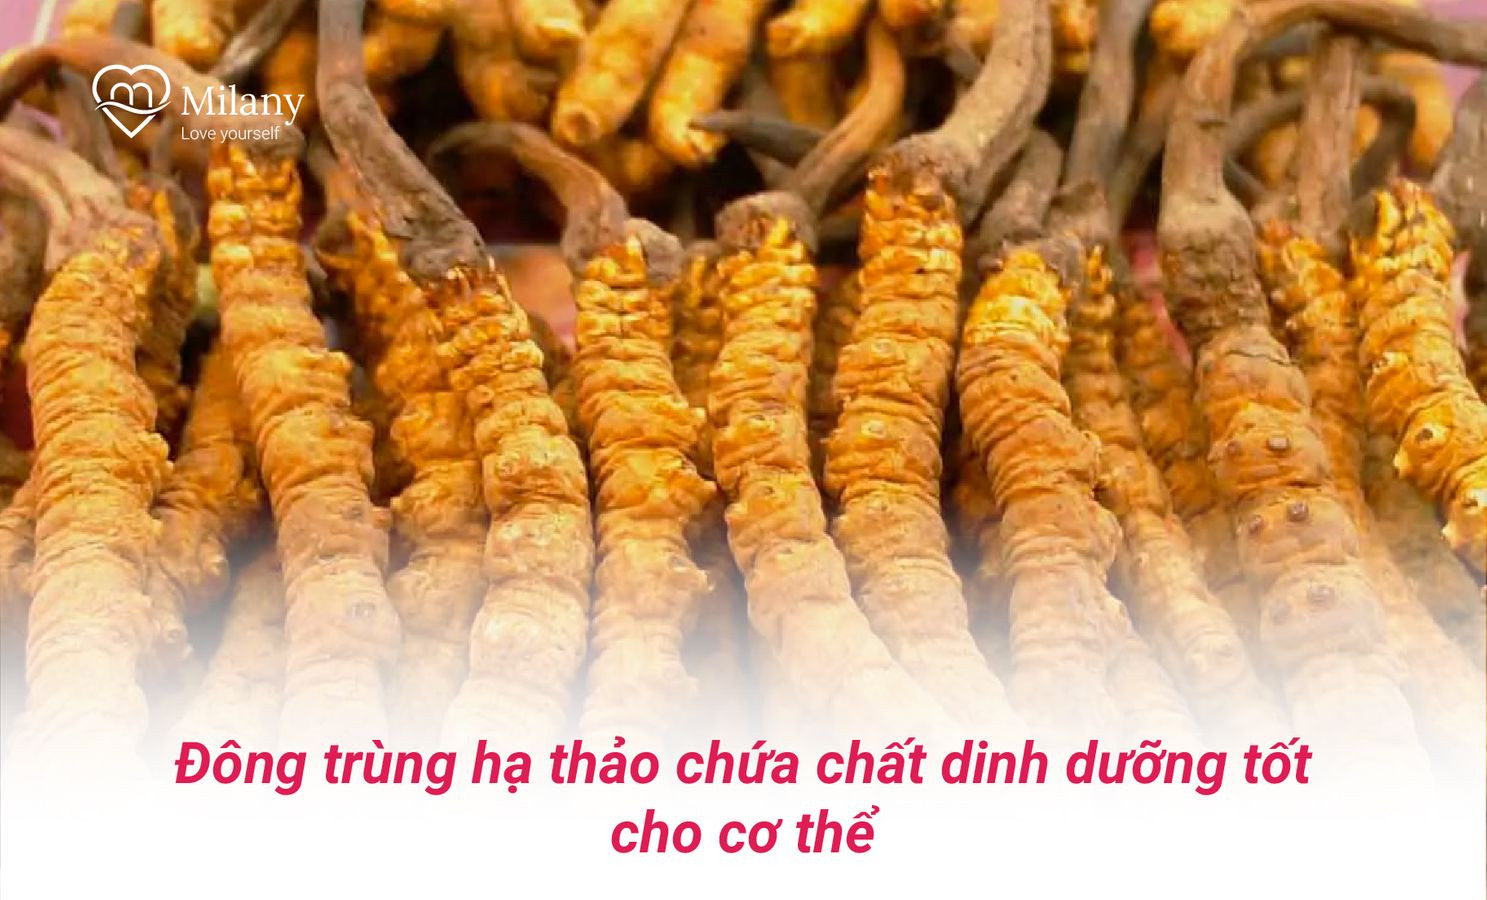 dong trung ha thao chua chat dinh duong tot cho co the